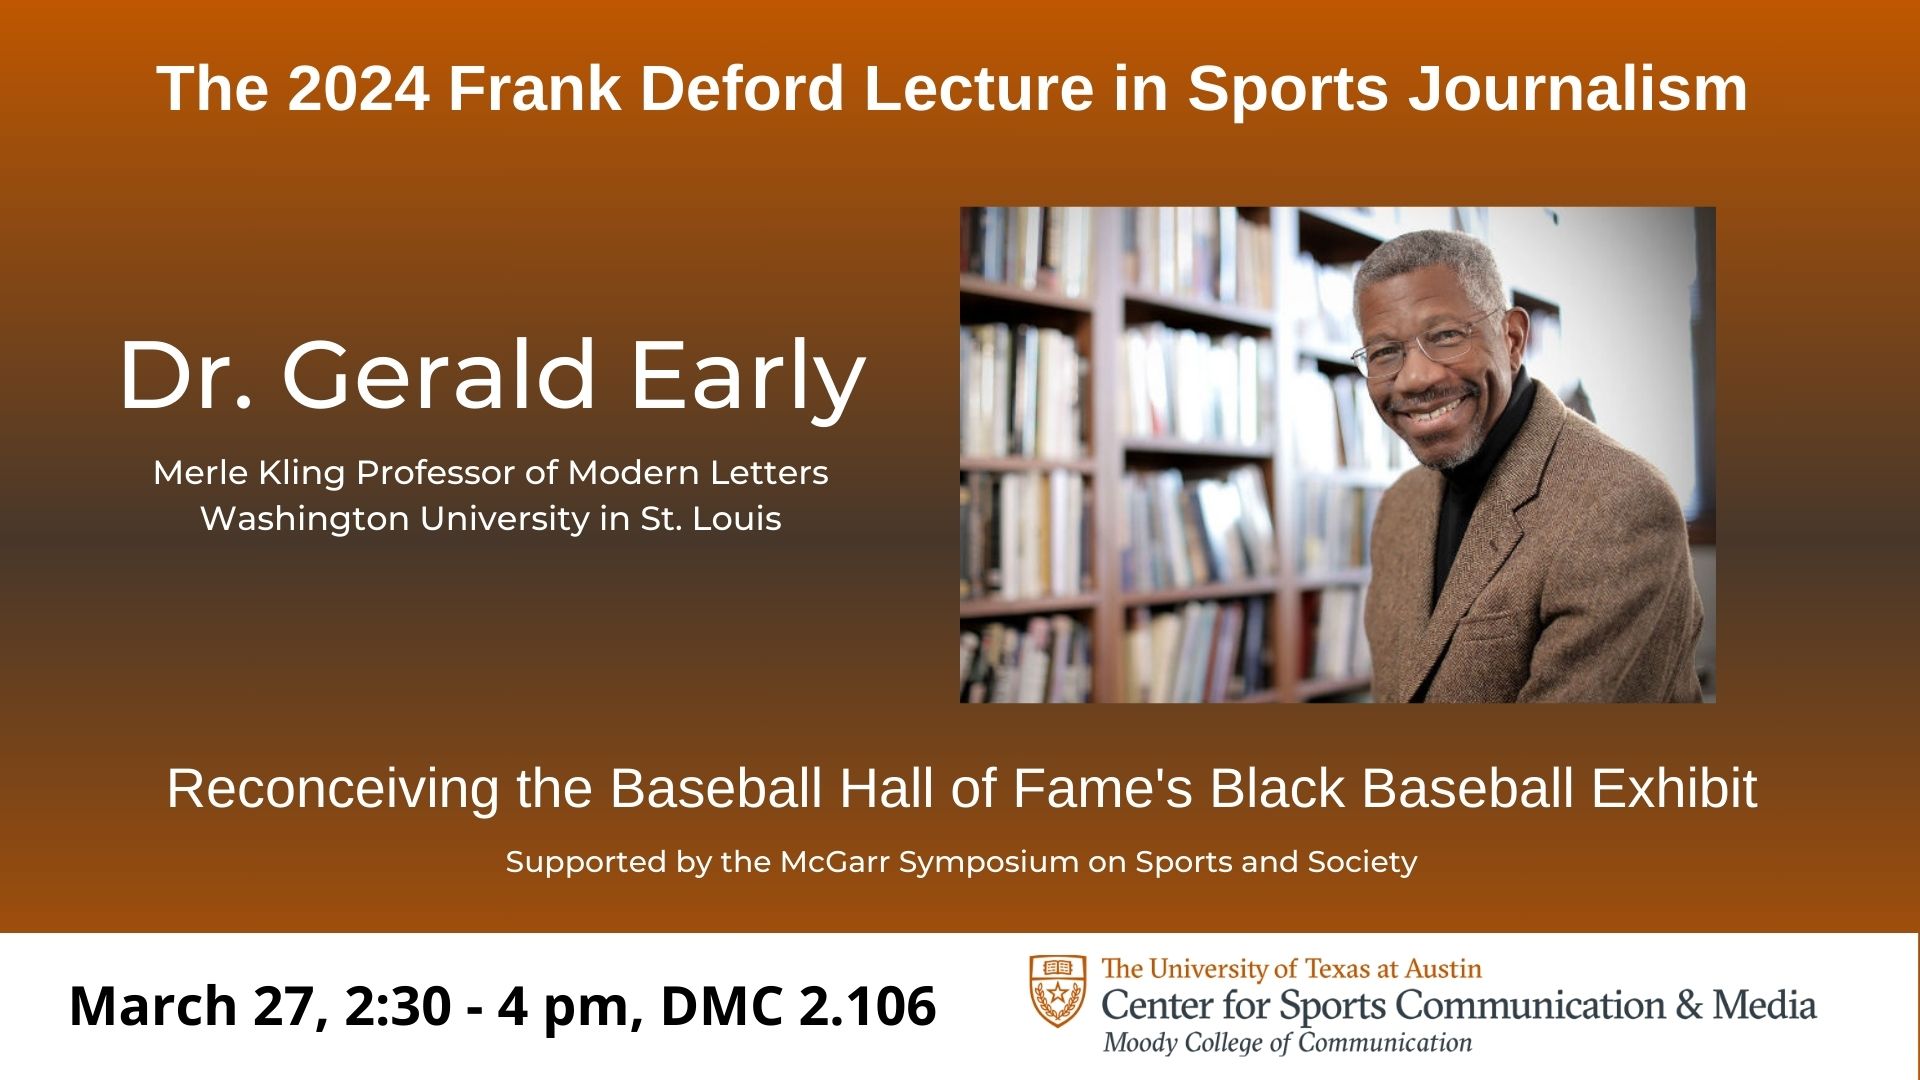 gerald early lecture